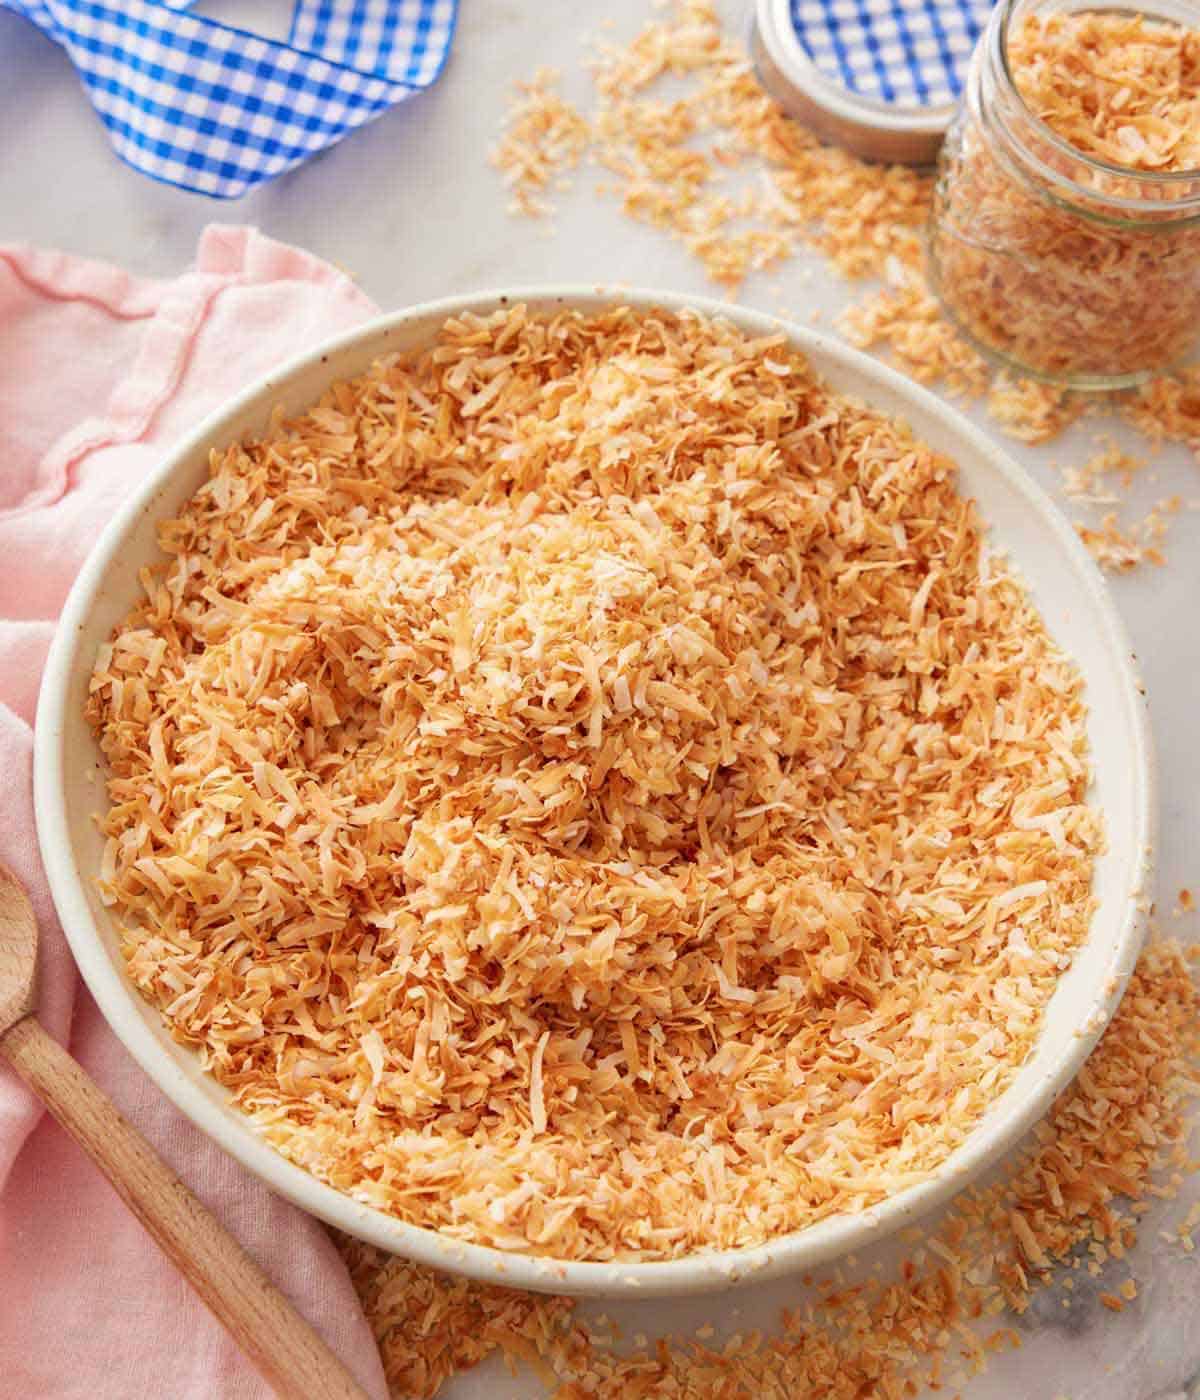 A large bowl of toasted coconut with a jar of to the side with more coconut scattered around.